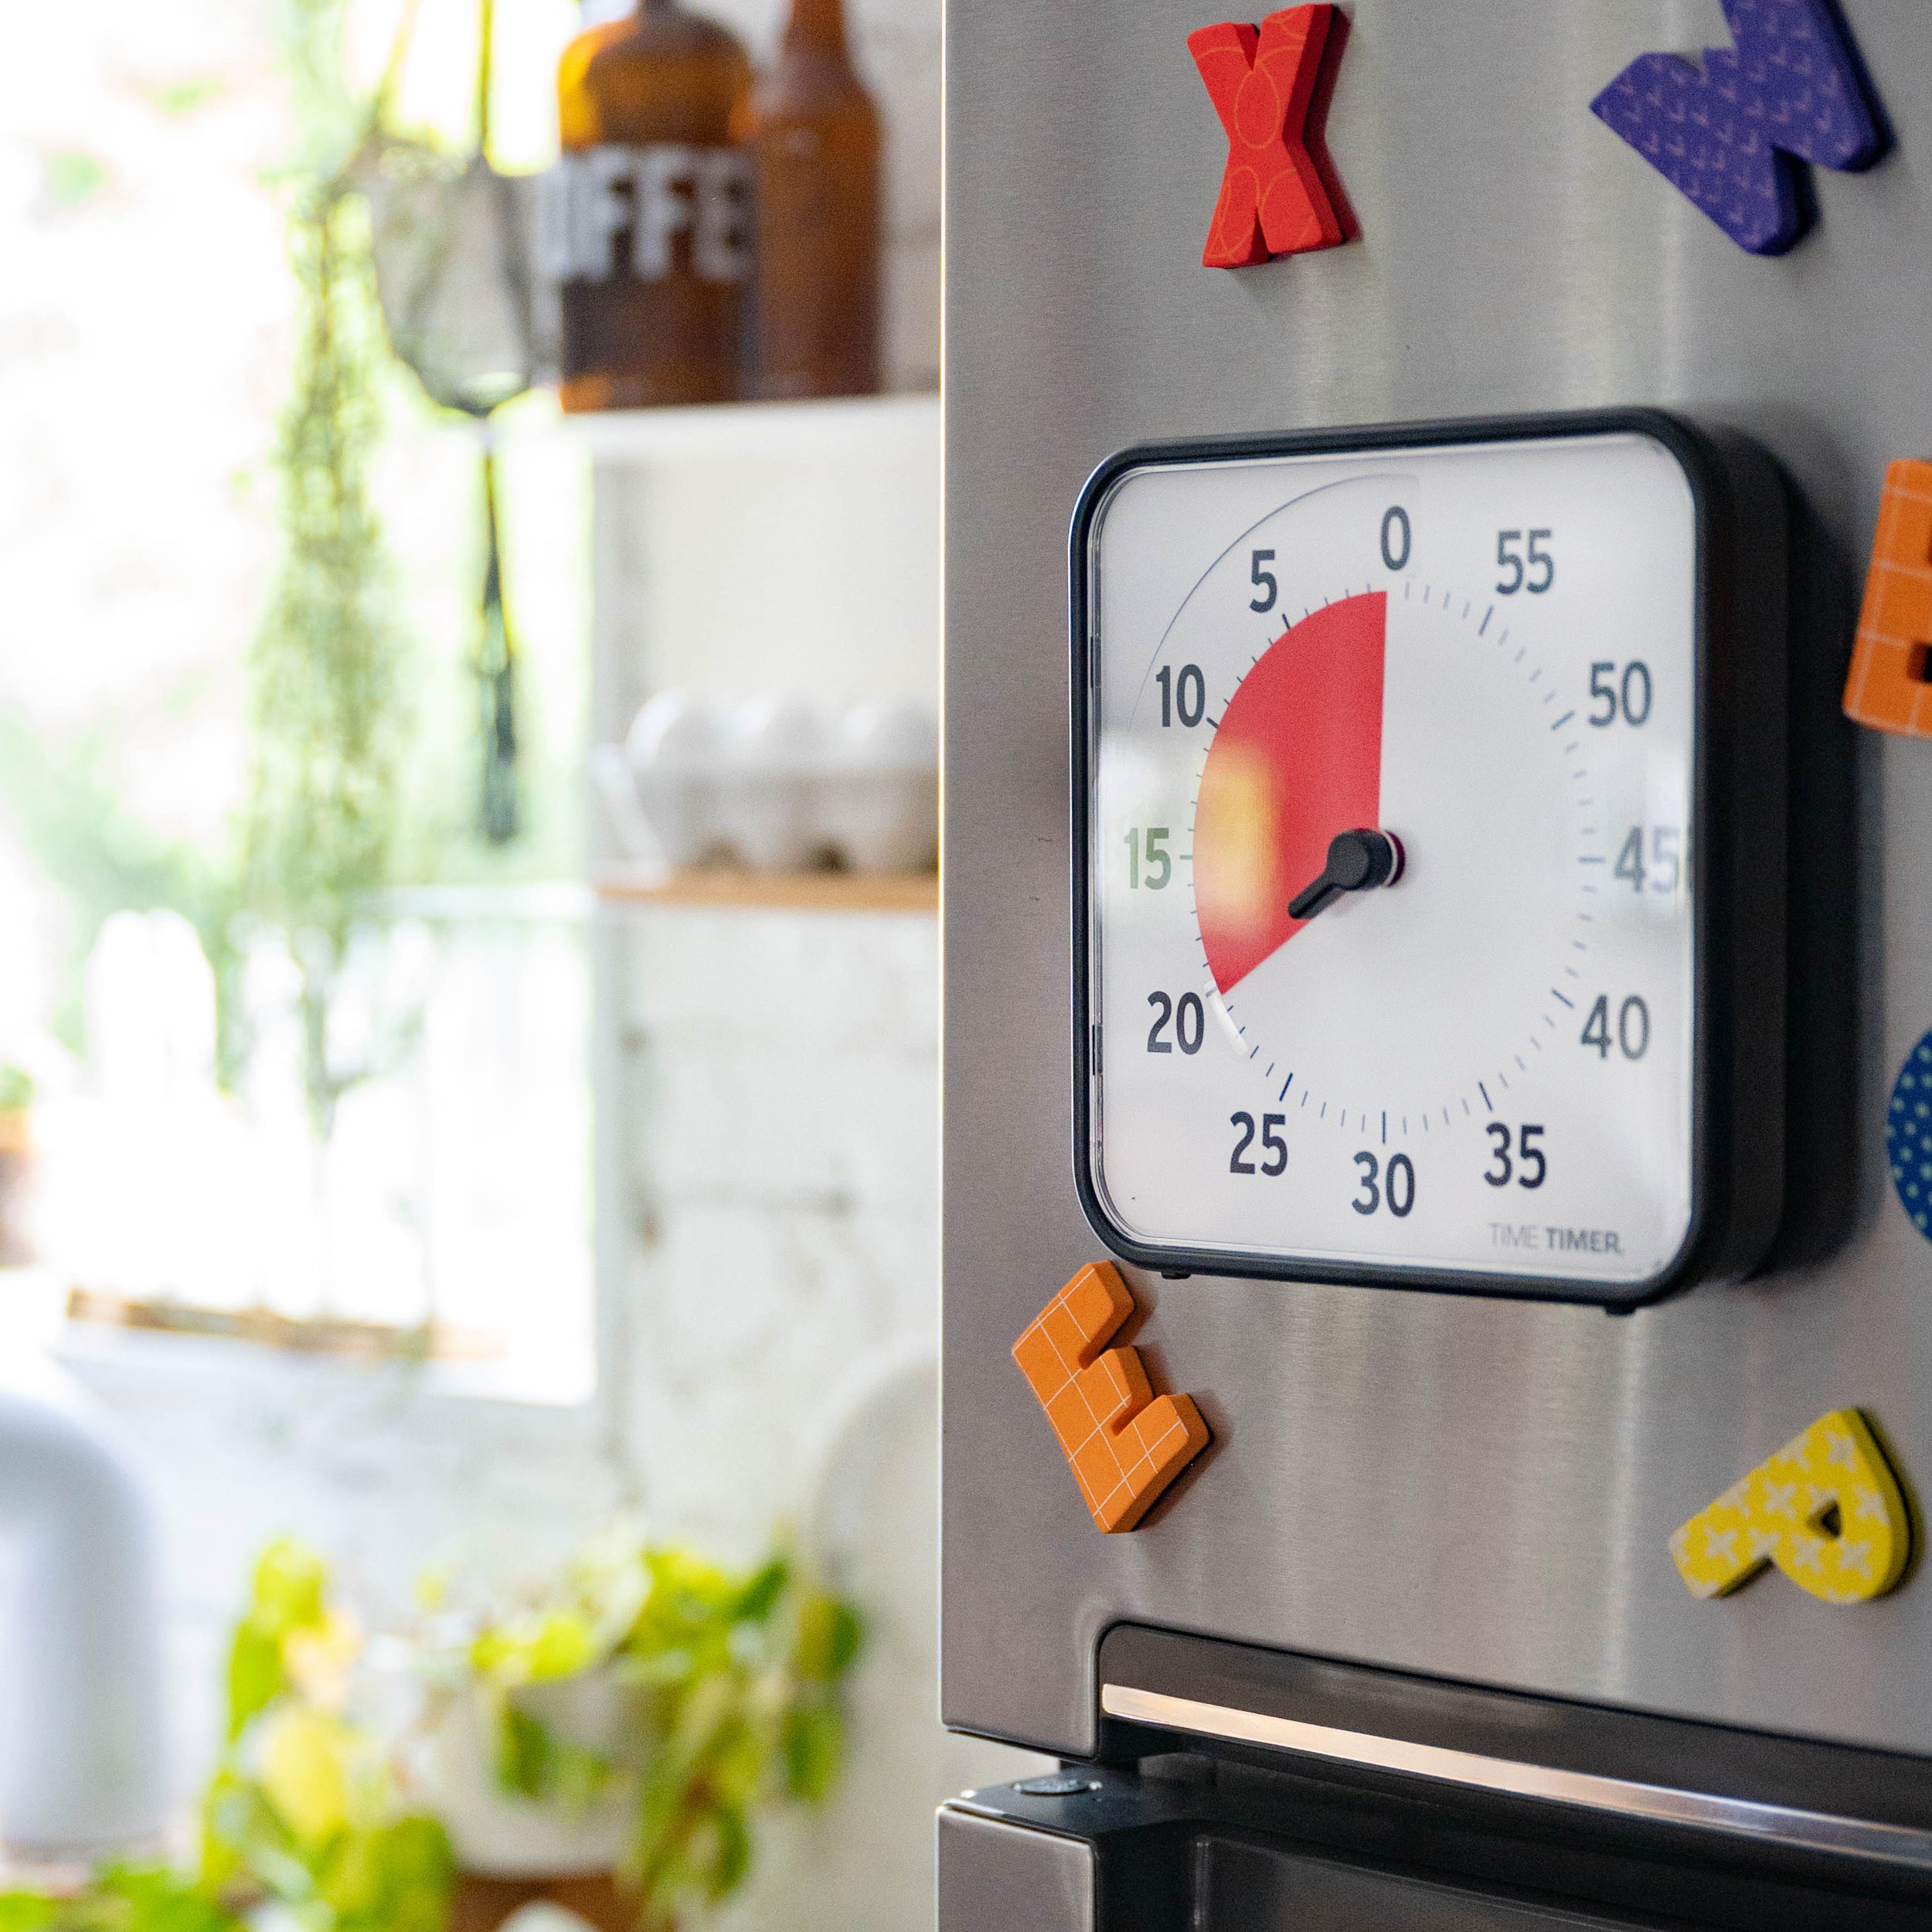 The Time Timer Original 8" visual timer is shown on the refrigerator in a kitchen. It is attached via the magnetic back. There are various letter magnets surrounding the timer. The red disk of the timer is set to 20 minutes. Plants and kitchen supplies can be seen out of focus in the background. 